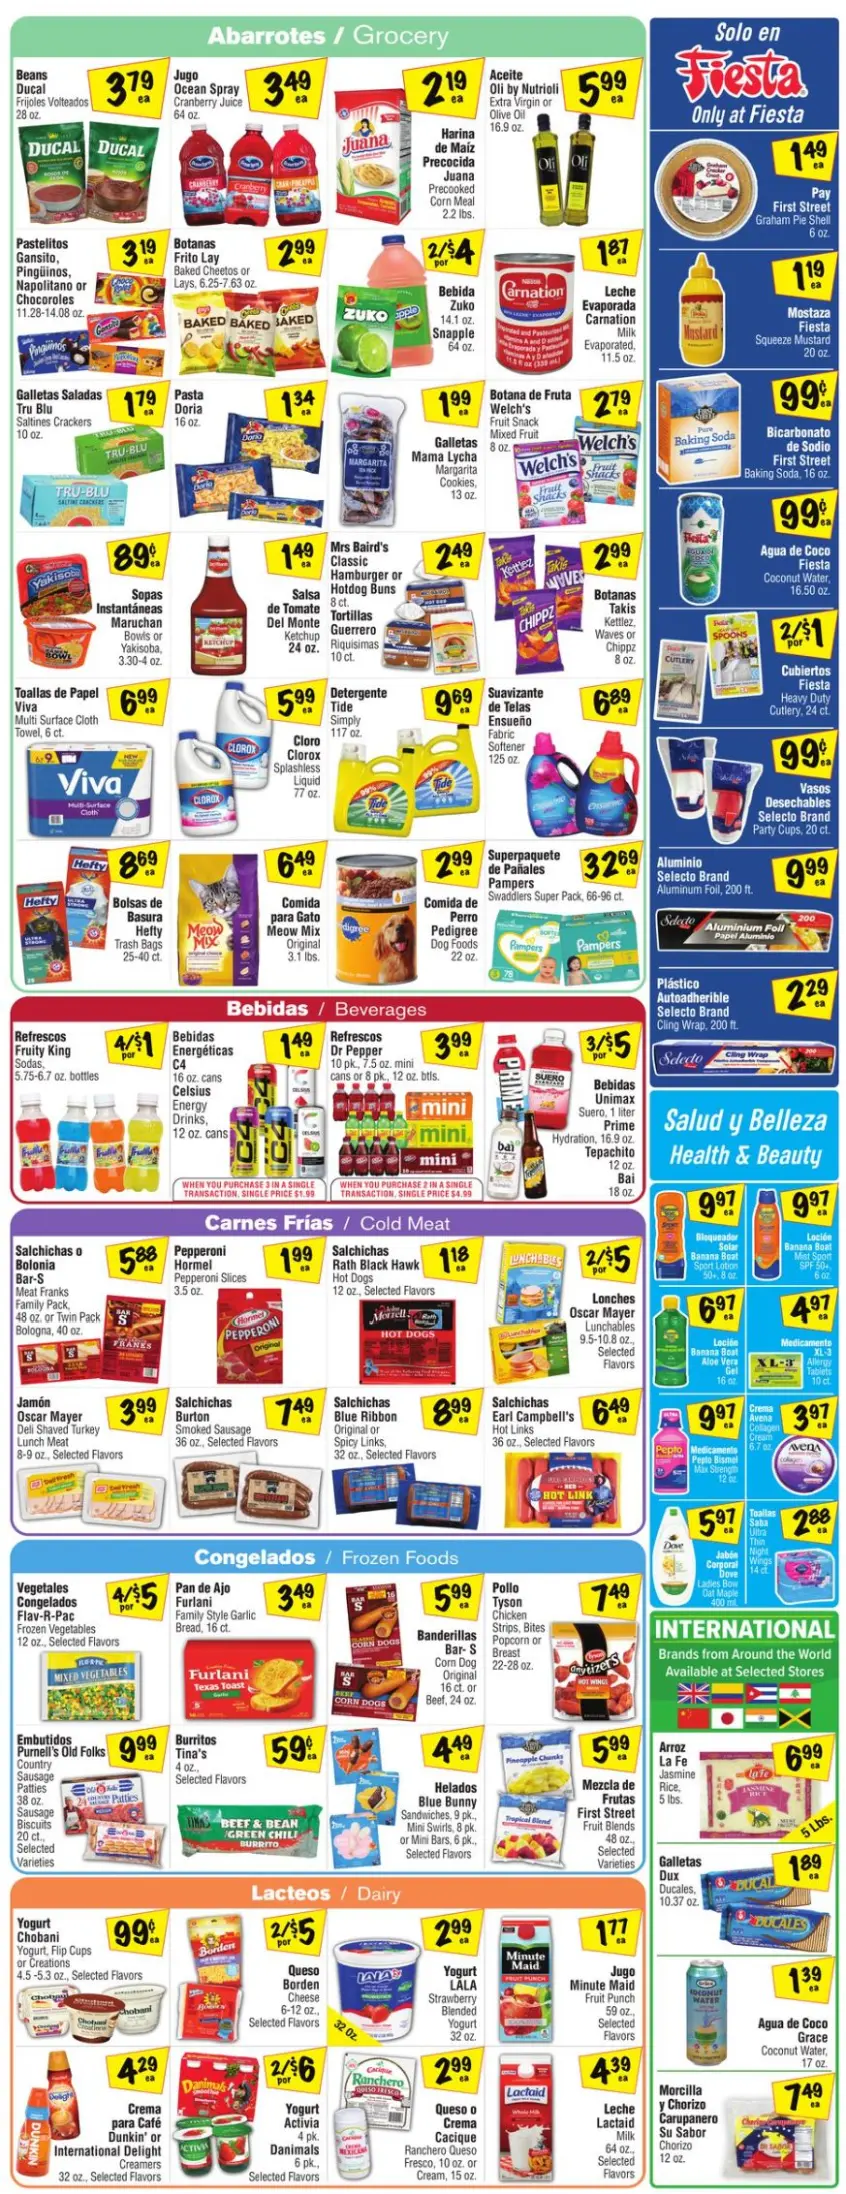 Fiesta Mart July 2024 Weekly Sales, Deals, Discounts and Digital Coupons.